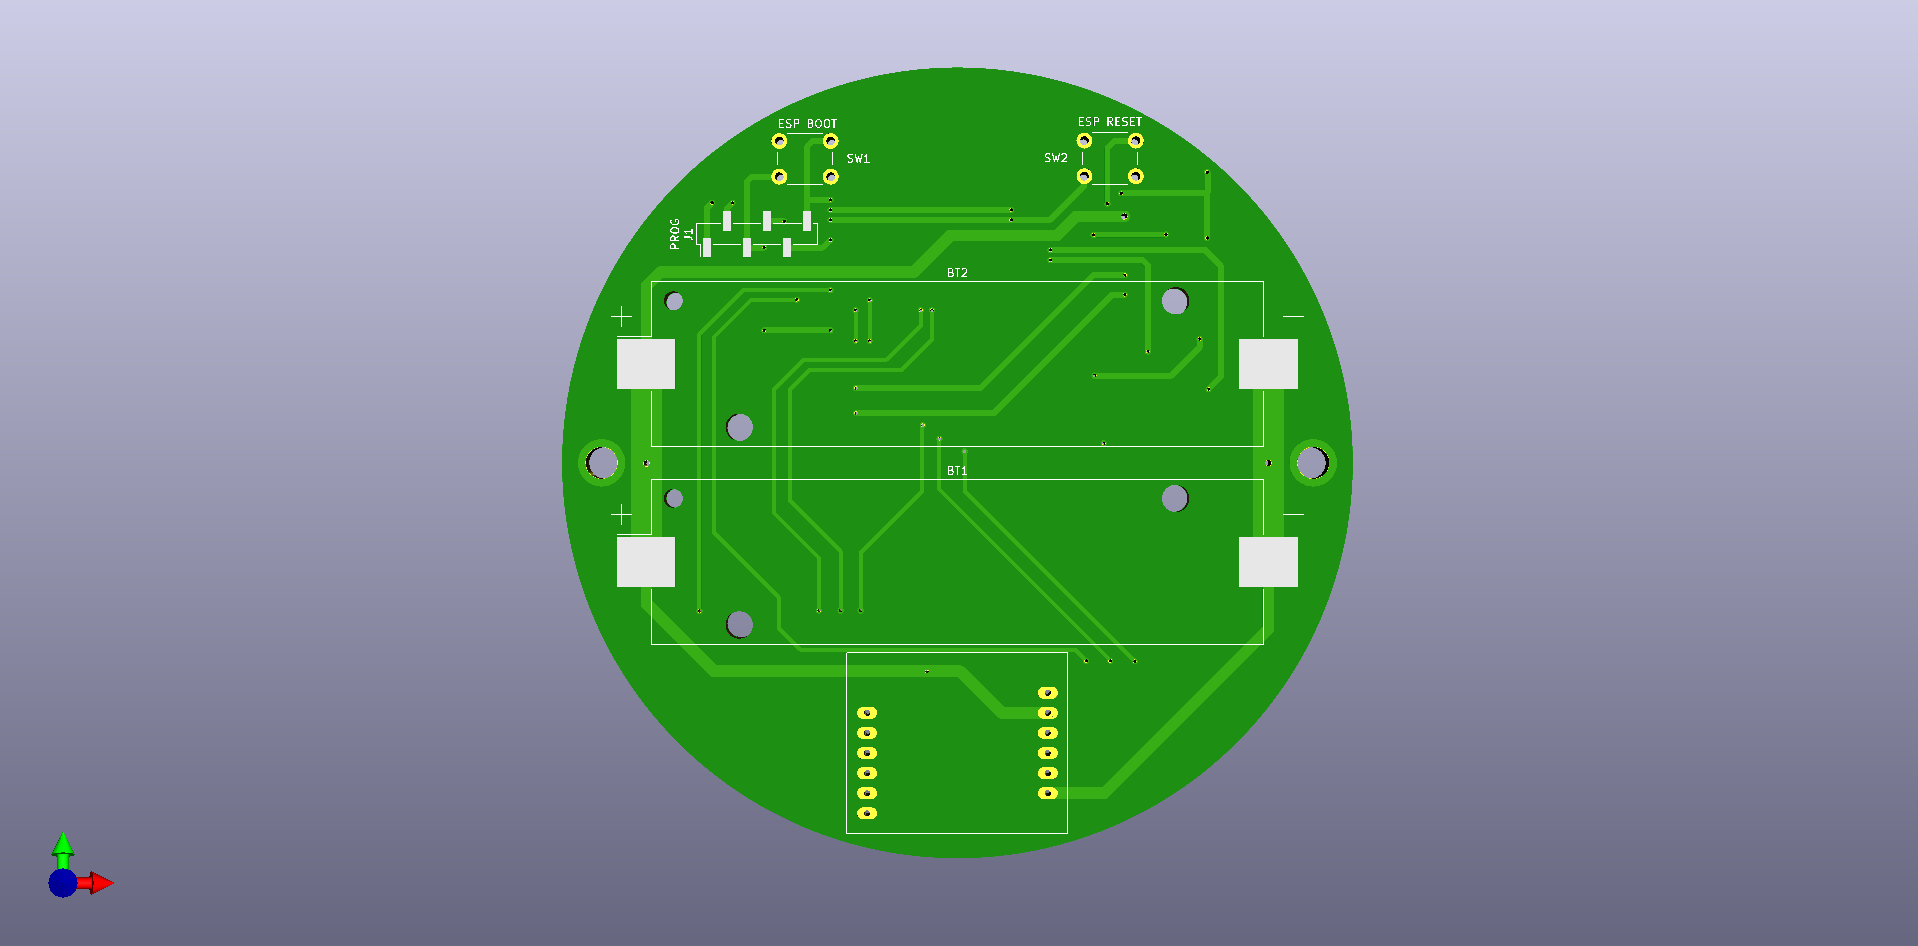 KiCad Render of PCB of Smart Dustbin IoT Project